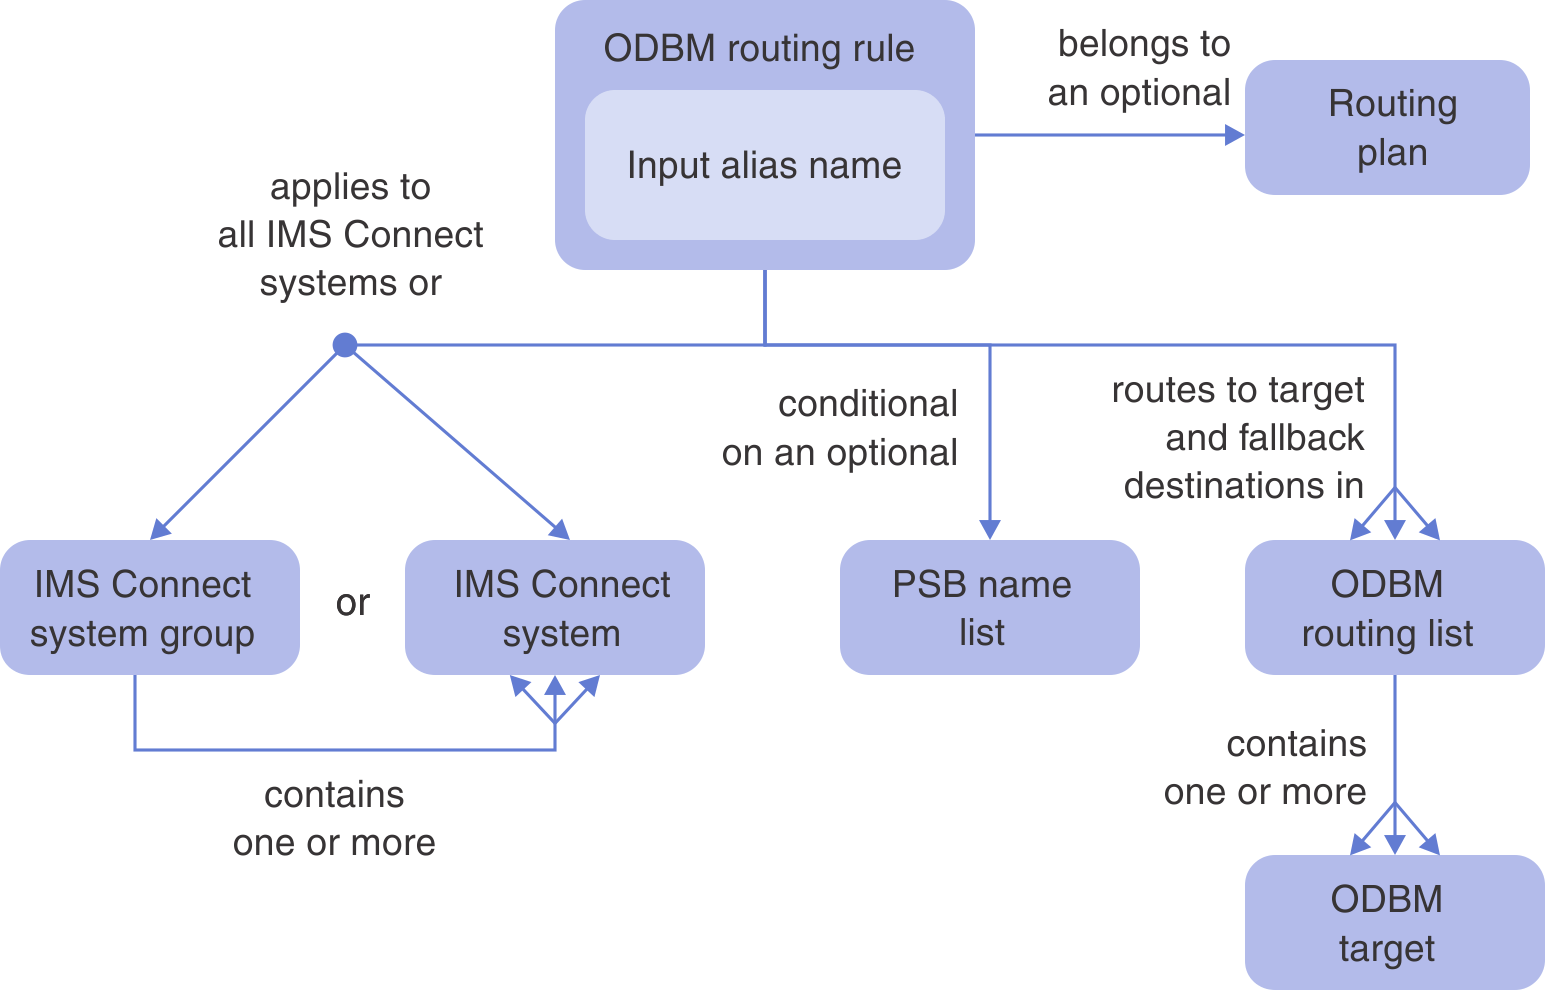 ODBM routing rules defined in IMS Connect Extensions route messages using the input alias name inside a DRDA request message to target and fallback destinations in an ODBM routing list containing one or more ODBM targets. ODBM routing rules apply to either an IMS Connect system or a group of systems and can be made conditional on an optional list of PSB names. ODBM routing rules may belong to a routing plan.